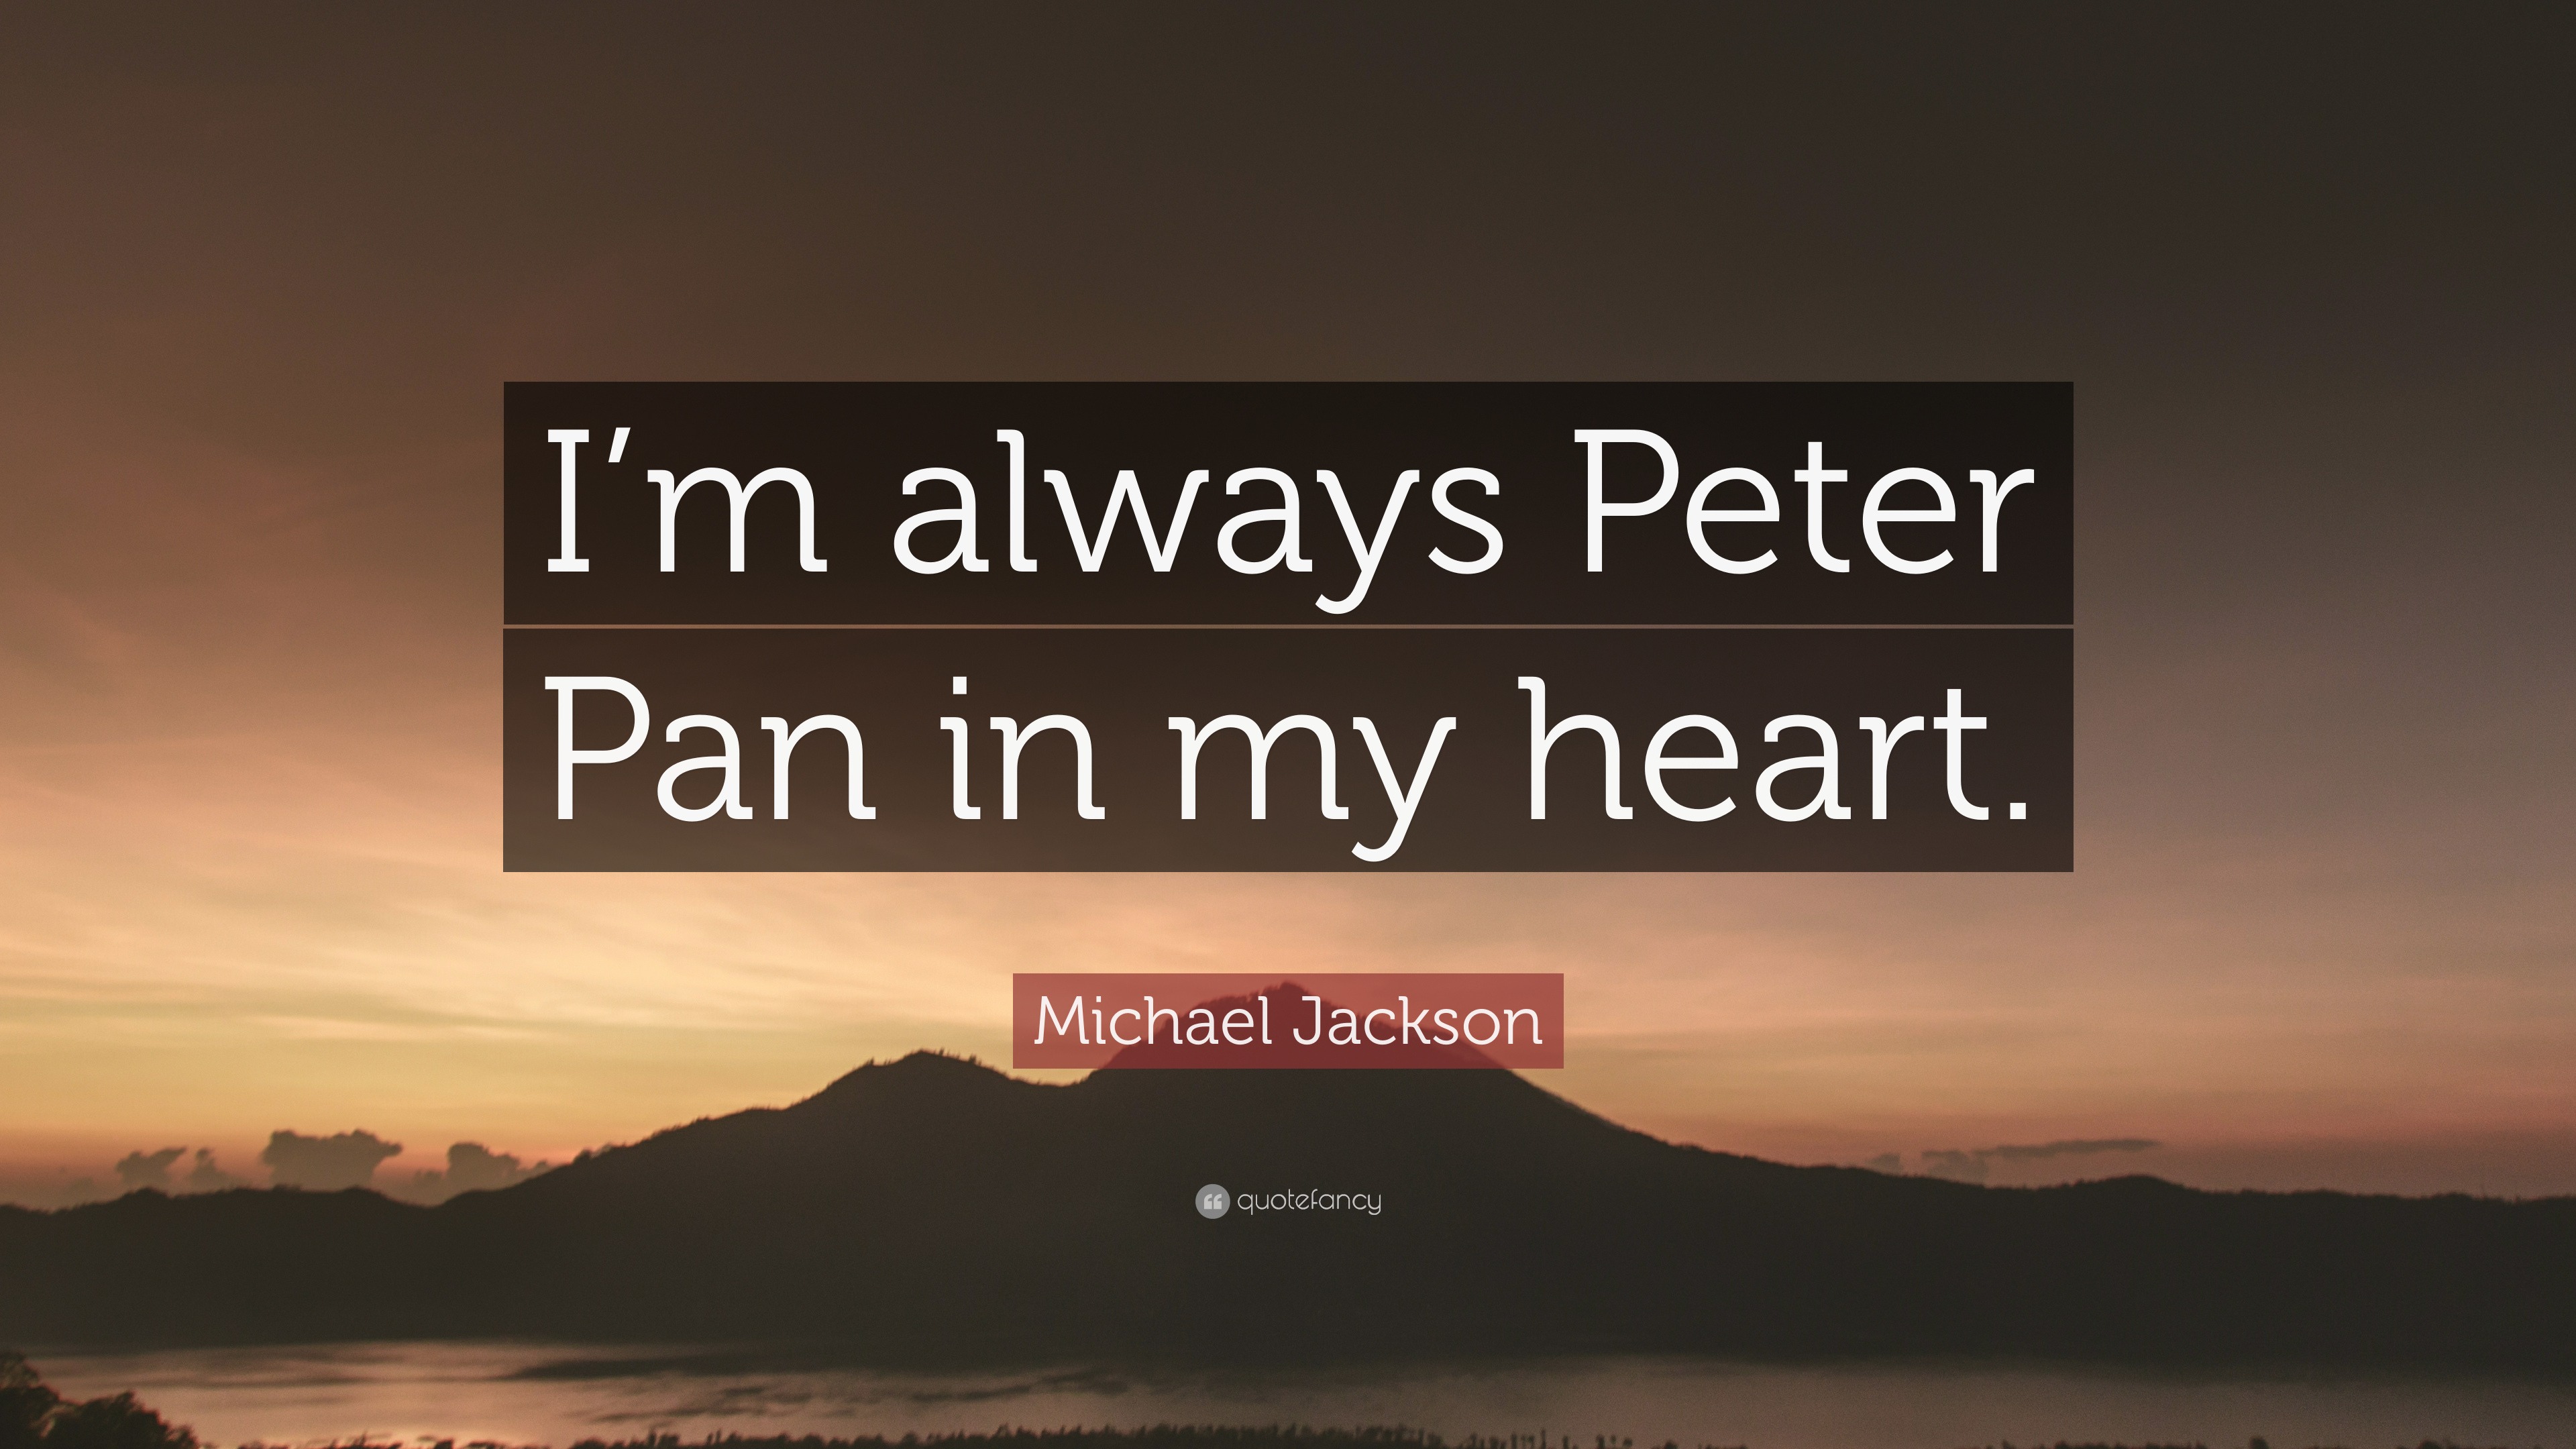 Michael Jackson Quote: “I’m always Peter Pan in my heart.” (12